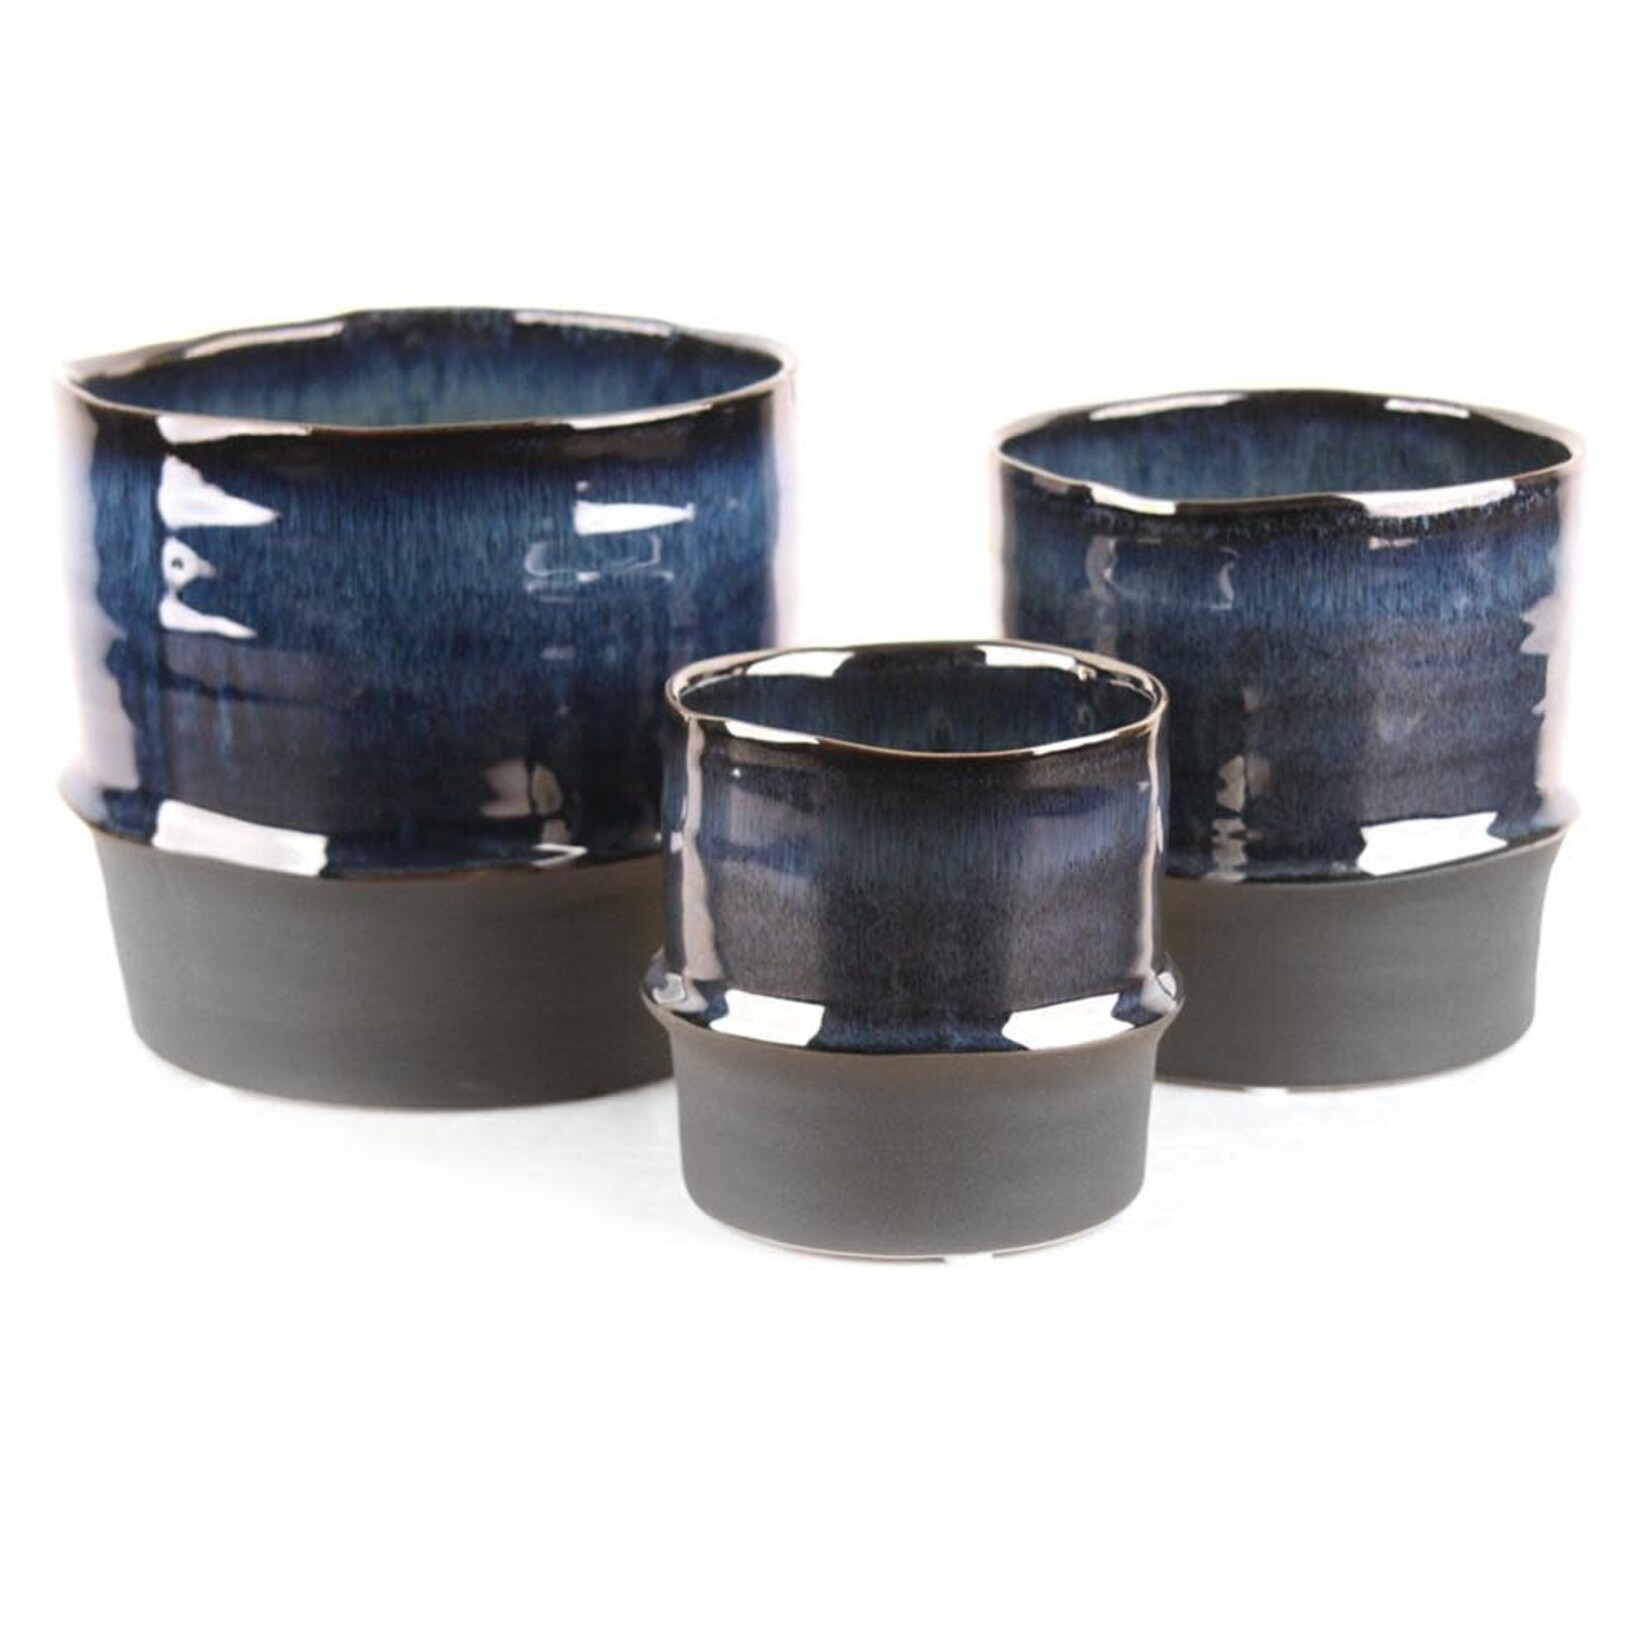 50% OFF WAS $11 NOW $5.50. 5.5” X 5.5” COBALT CLUE CERAMIC LIMOGES COLLECTION